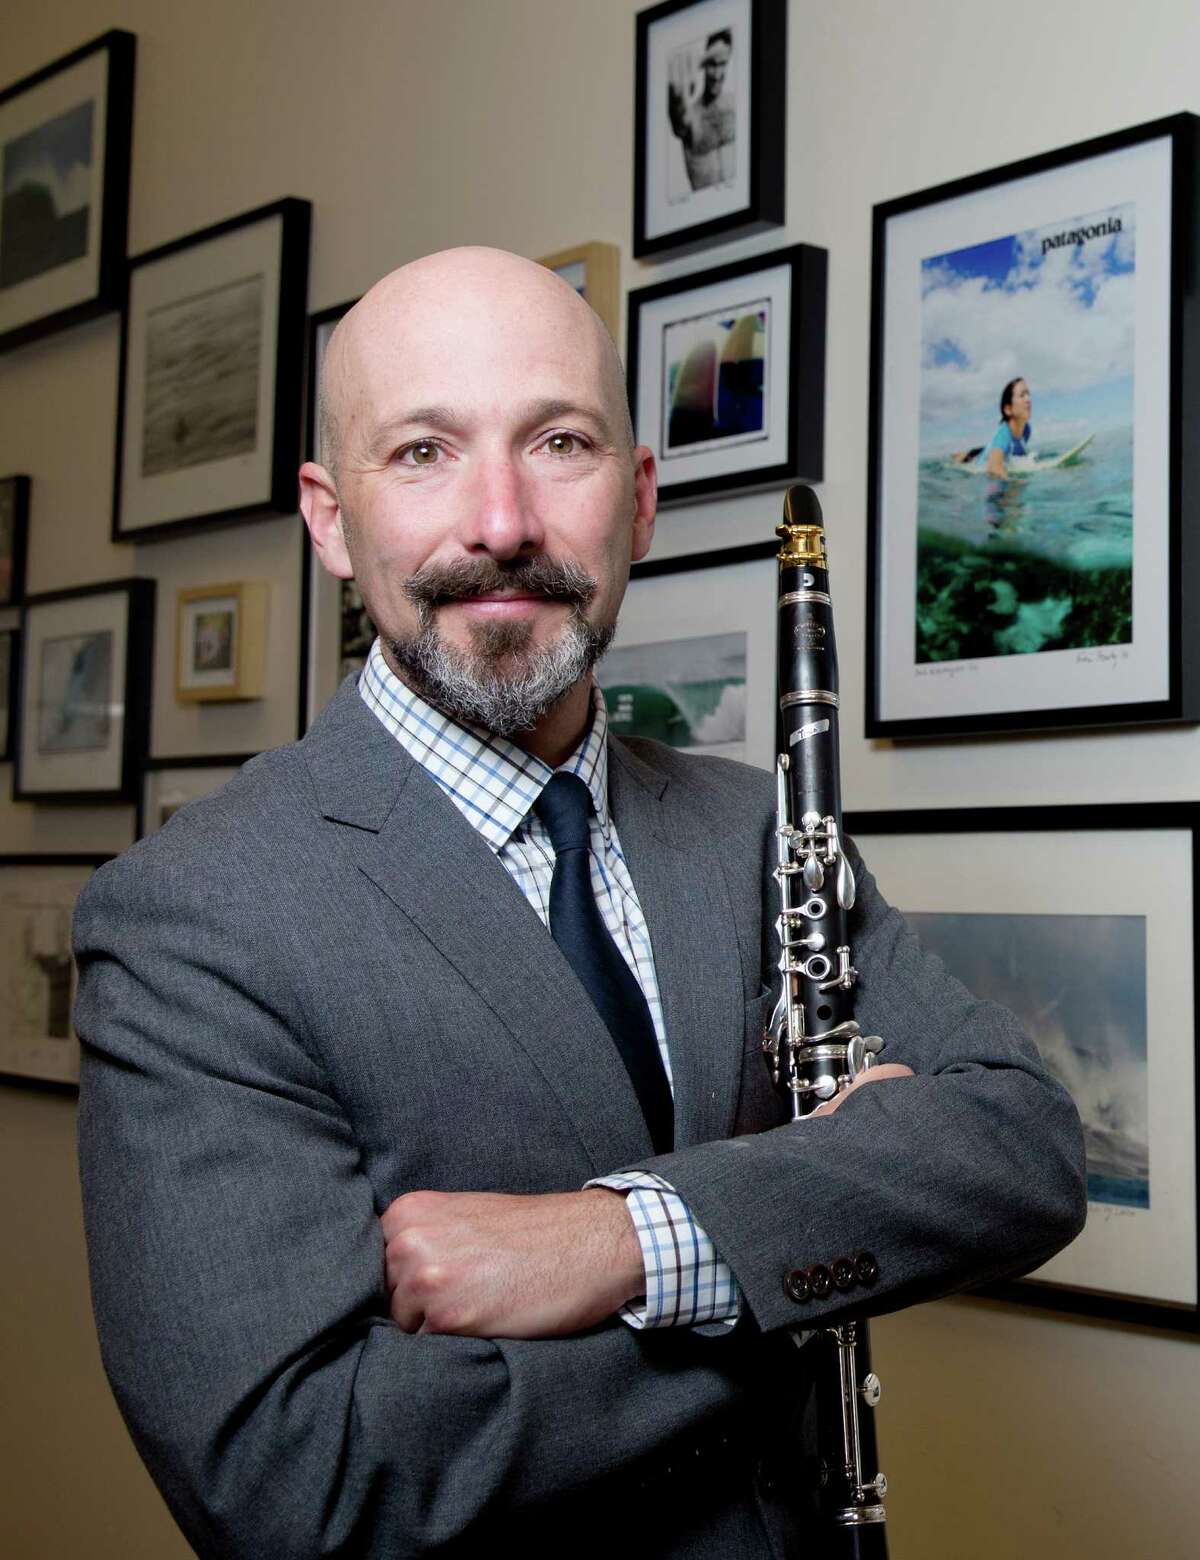 Richie Hawley﻿, prodigy on the clarinet, became the Cincinnati Symphony's first-chair clarinetist at age 23 (in 1994). He began teaching at Rice University in 2011. ﻿